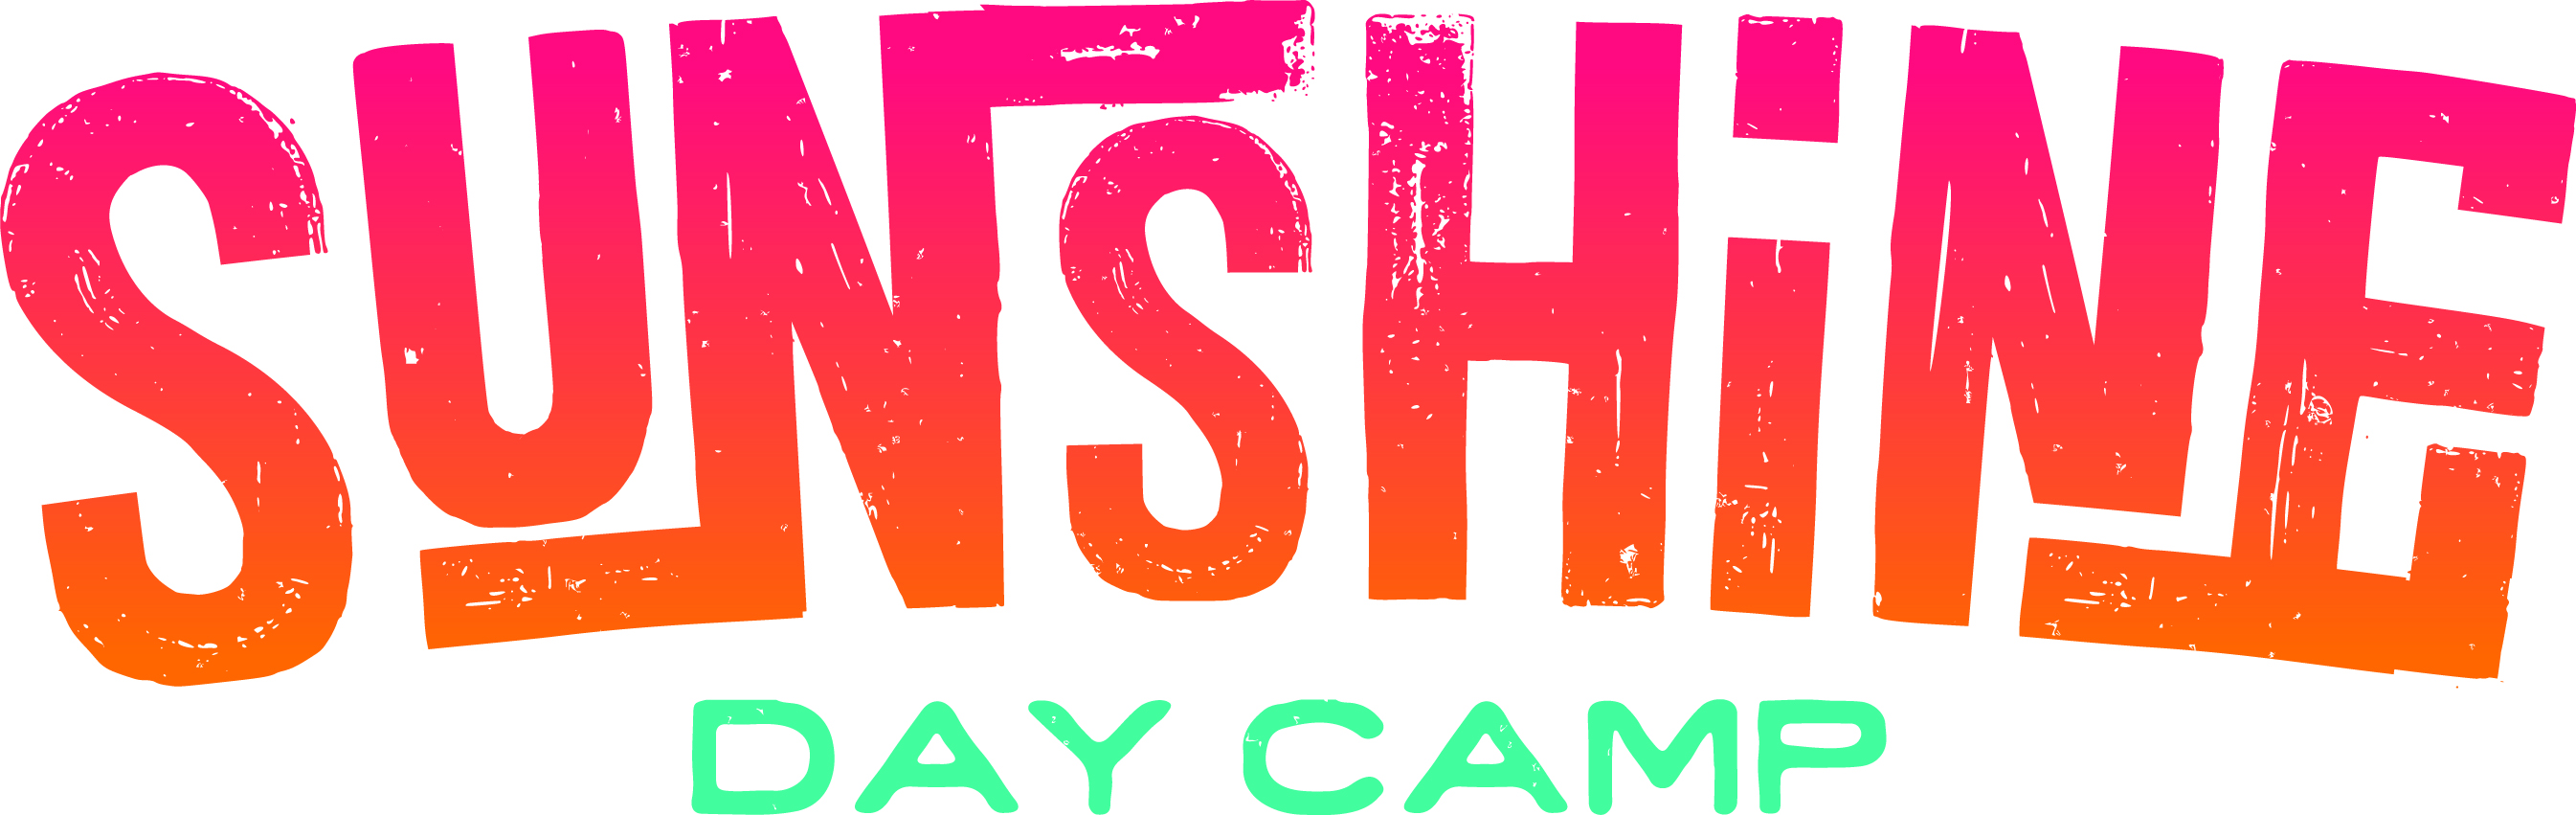 Sunshine Day Camp Reviews, Rating | SoTellUs